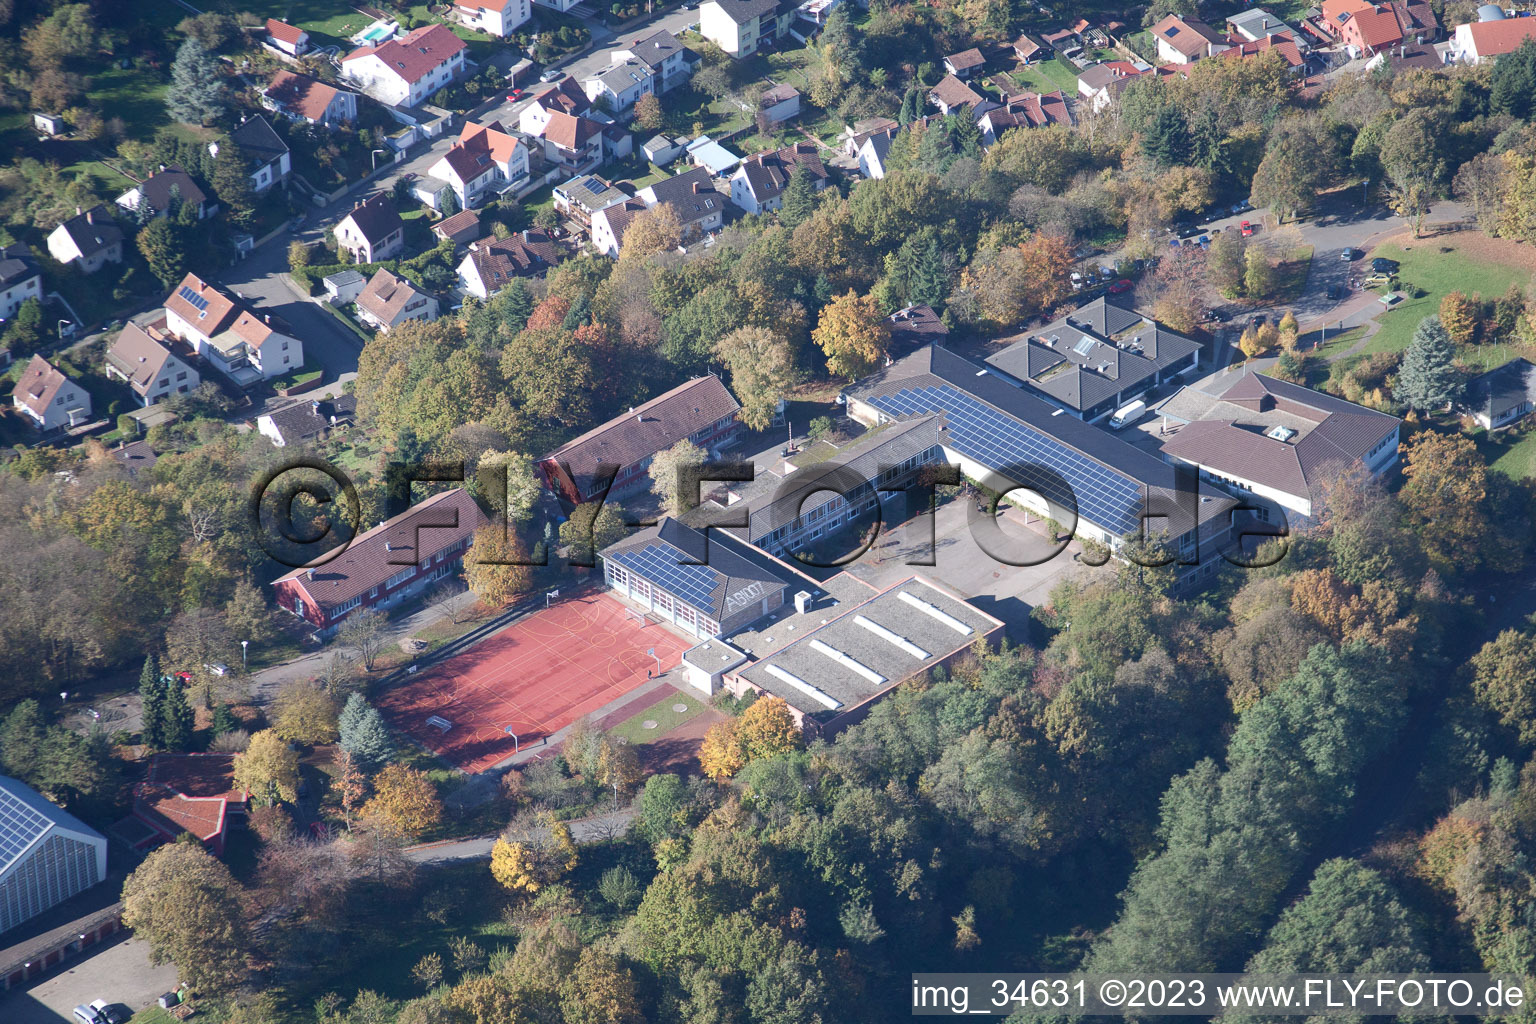 Aerial photograpy of Private Trifels High School in Annweiler am Trifels in the state Rhineland-Palatinate, Germany